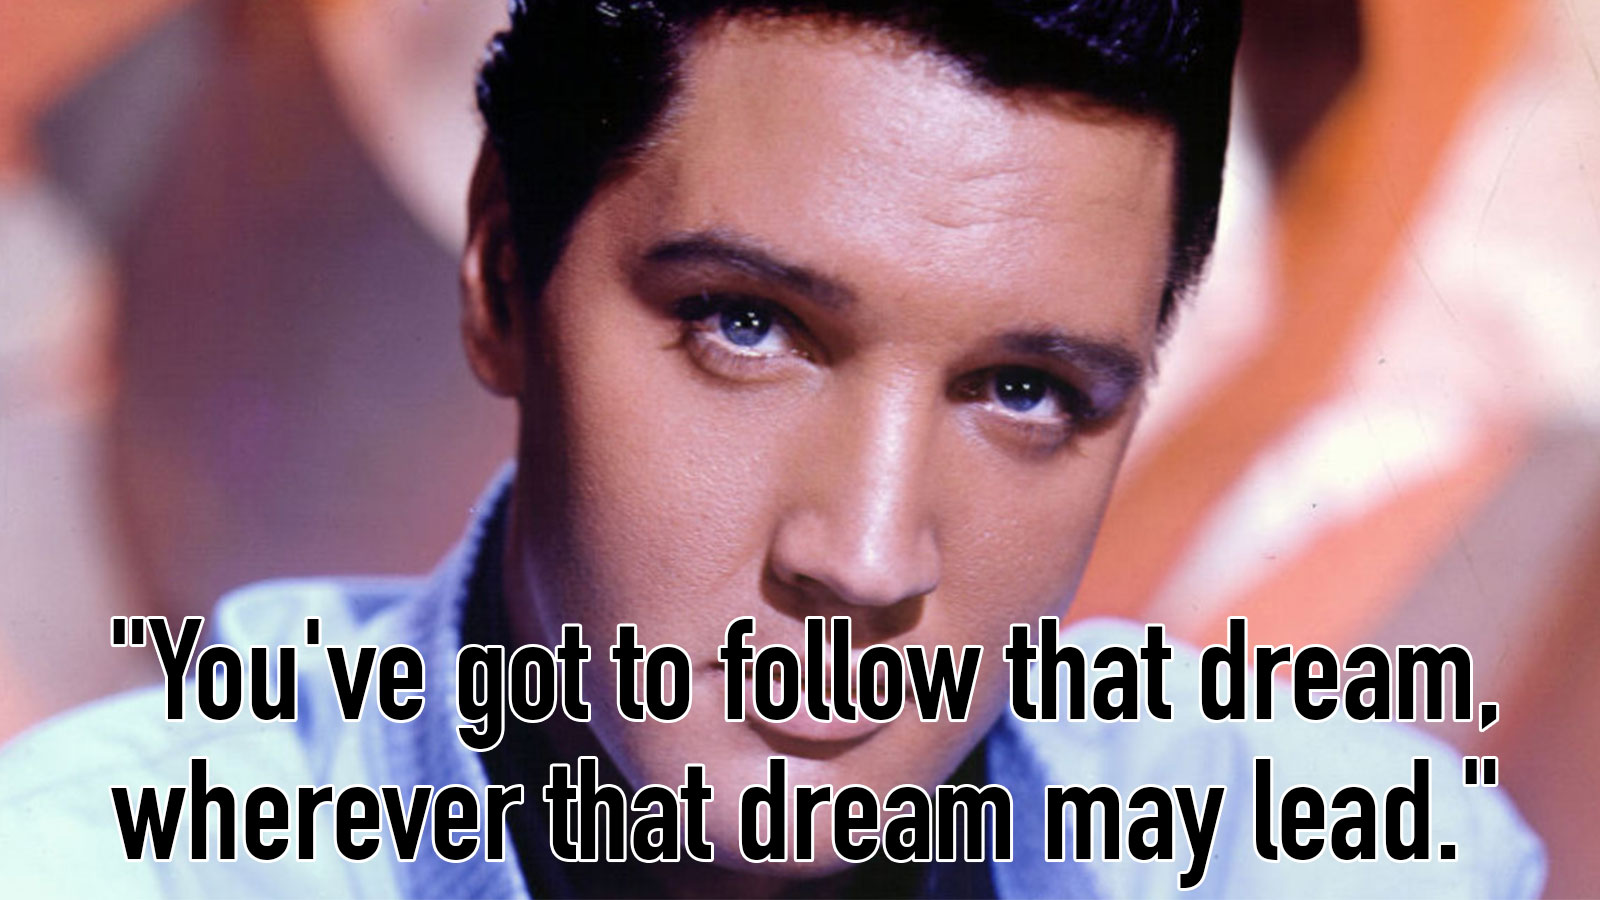 Can You Guess Which Elvis Presley Song This Lyric Is From? 41